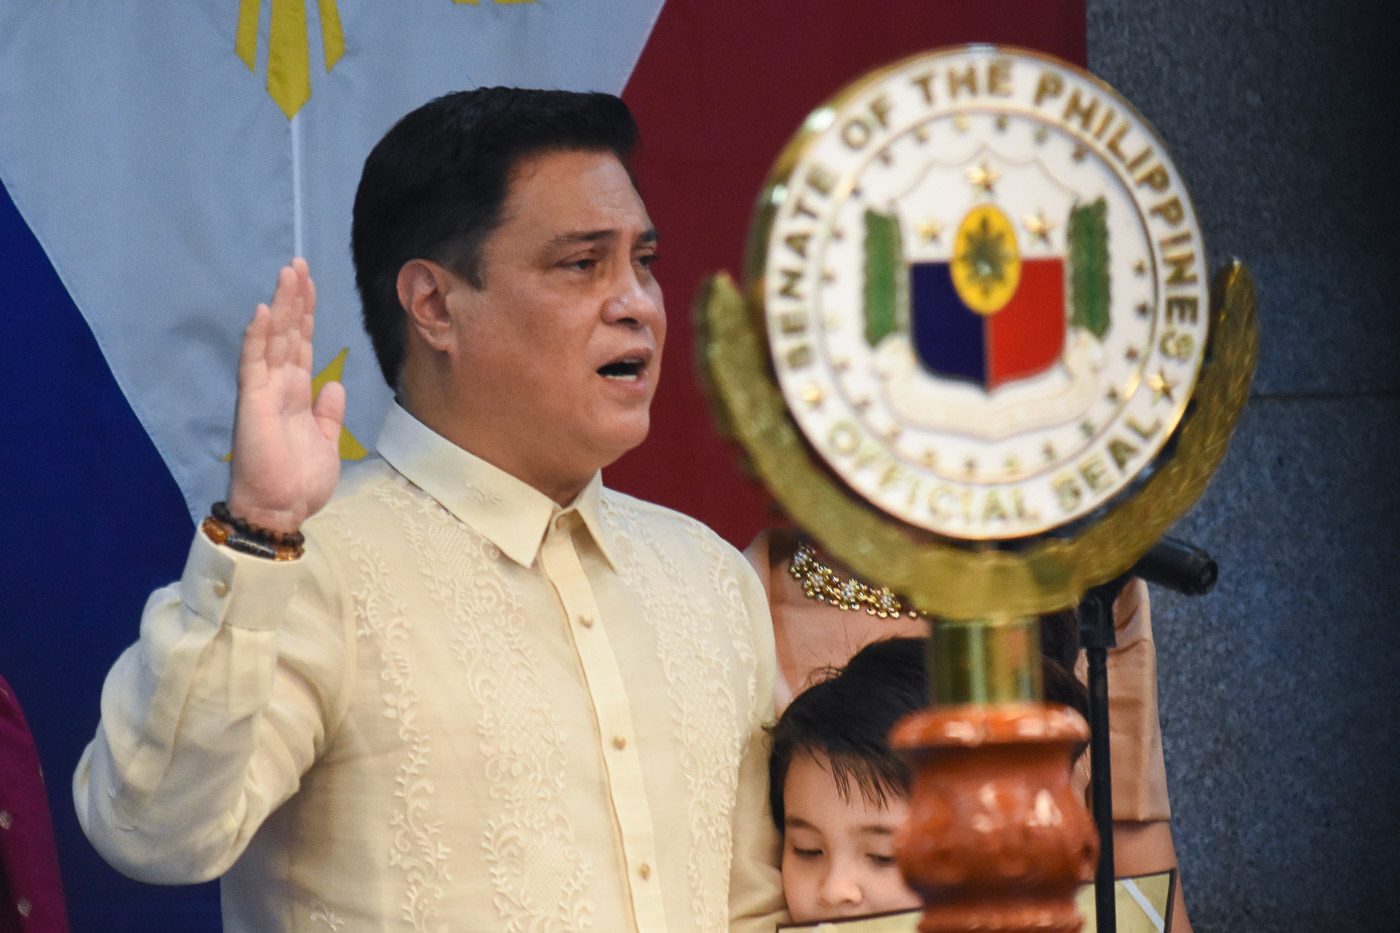 Zubiri is Senate president, seeks to ‘solve problems more than find faults’